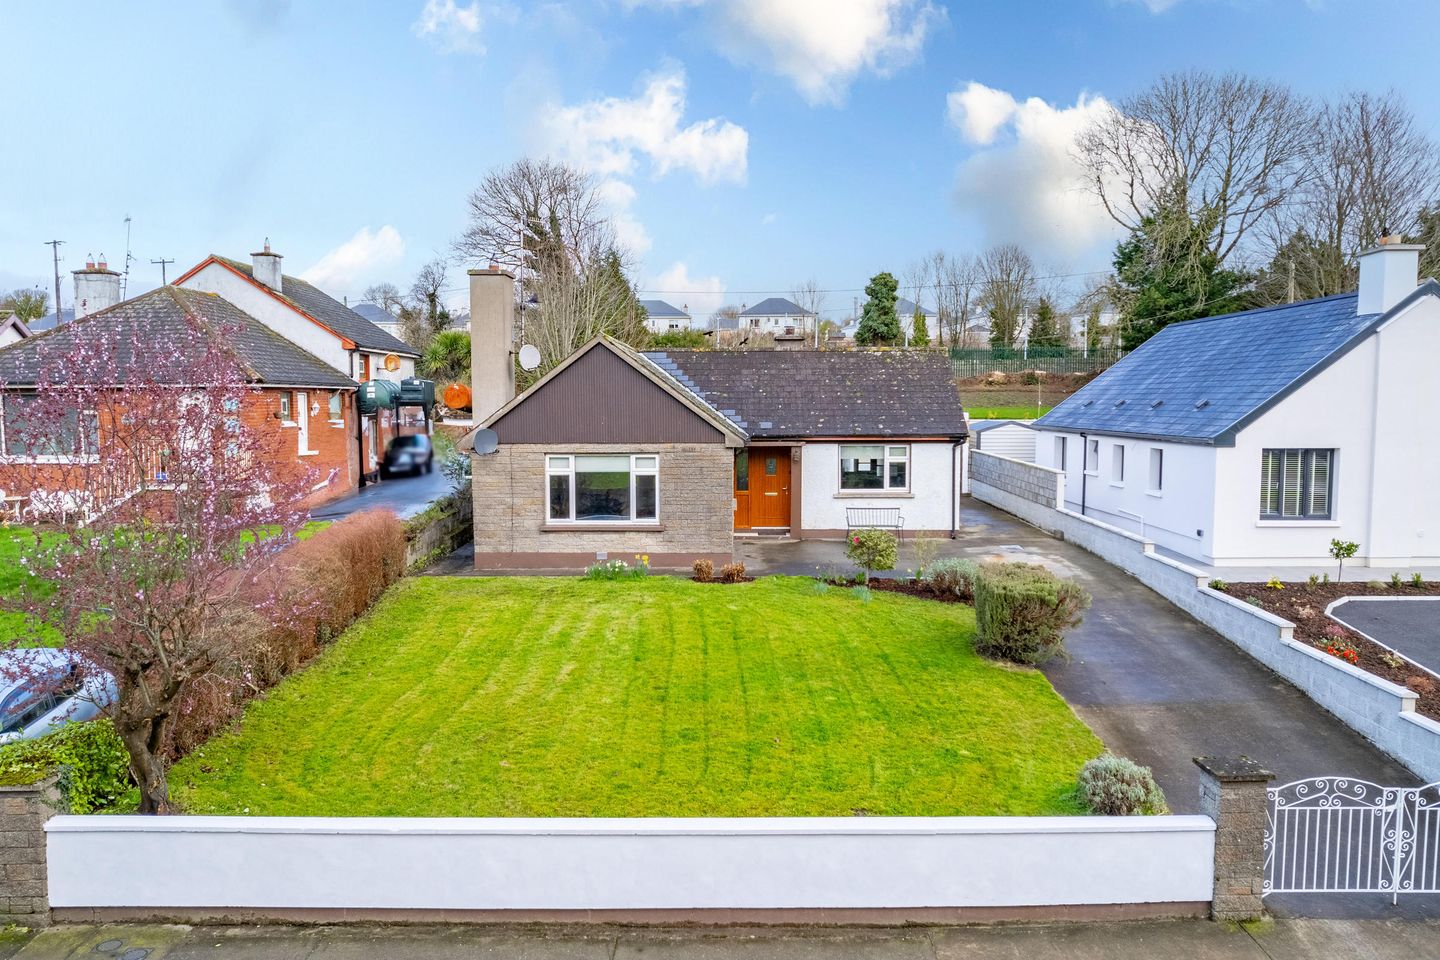 3 Ash Park, Carrick-on-Suir, Co. Tipperary, E32NT27